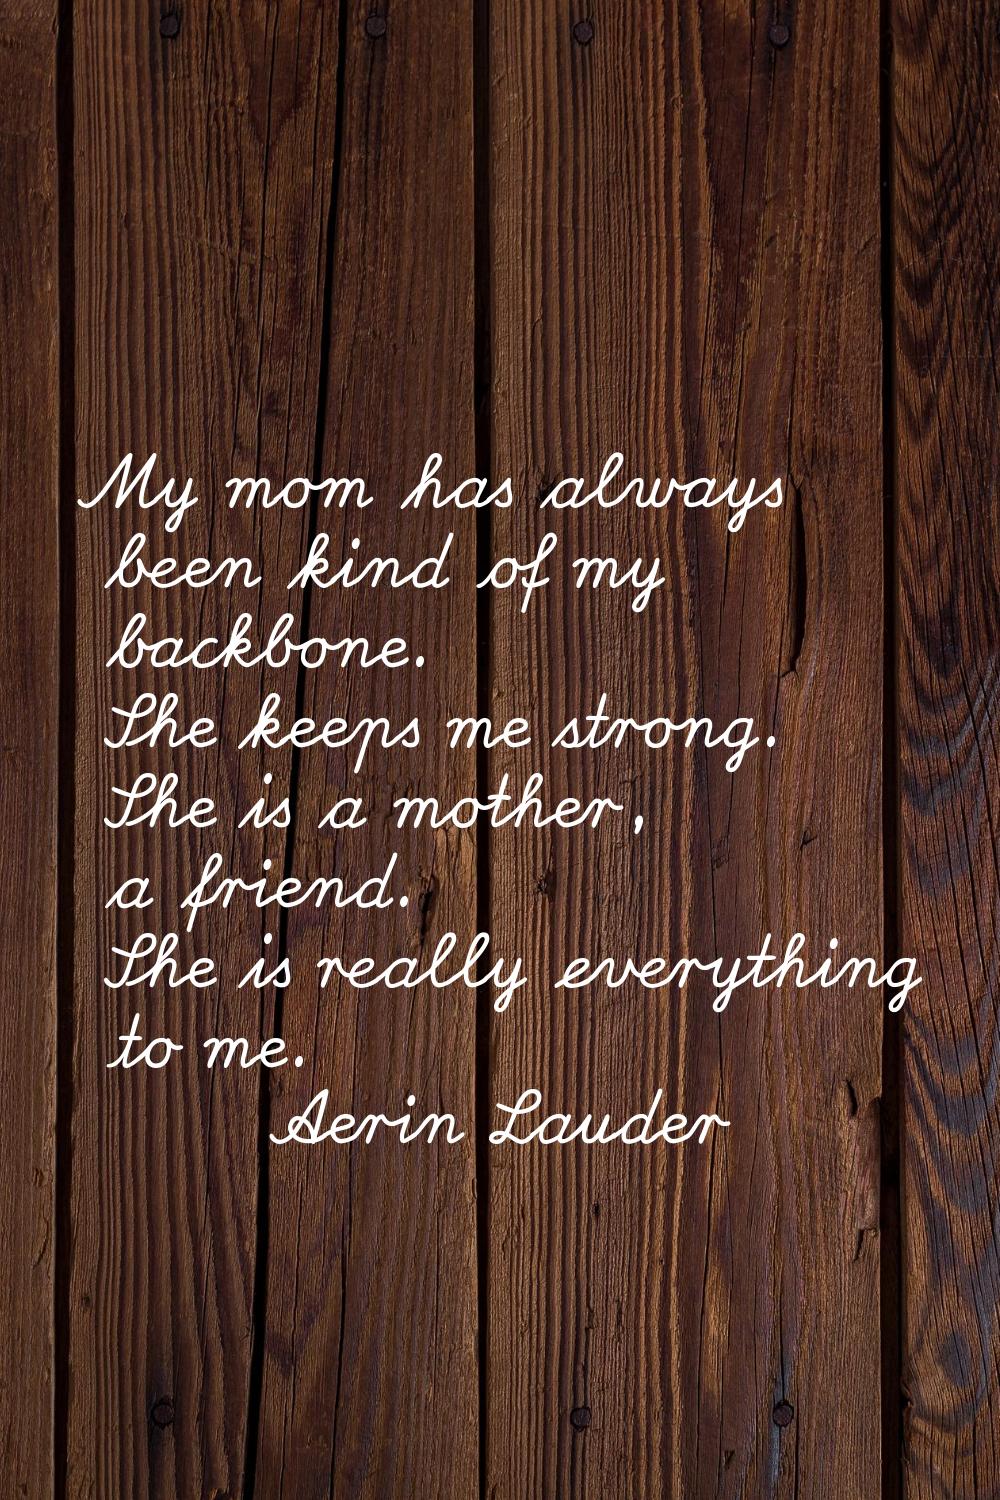 My mom has always been kind of my backbone. She keeps me strong. She is a mother, a friend. She is 